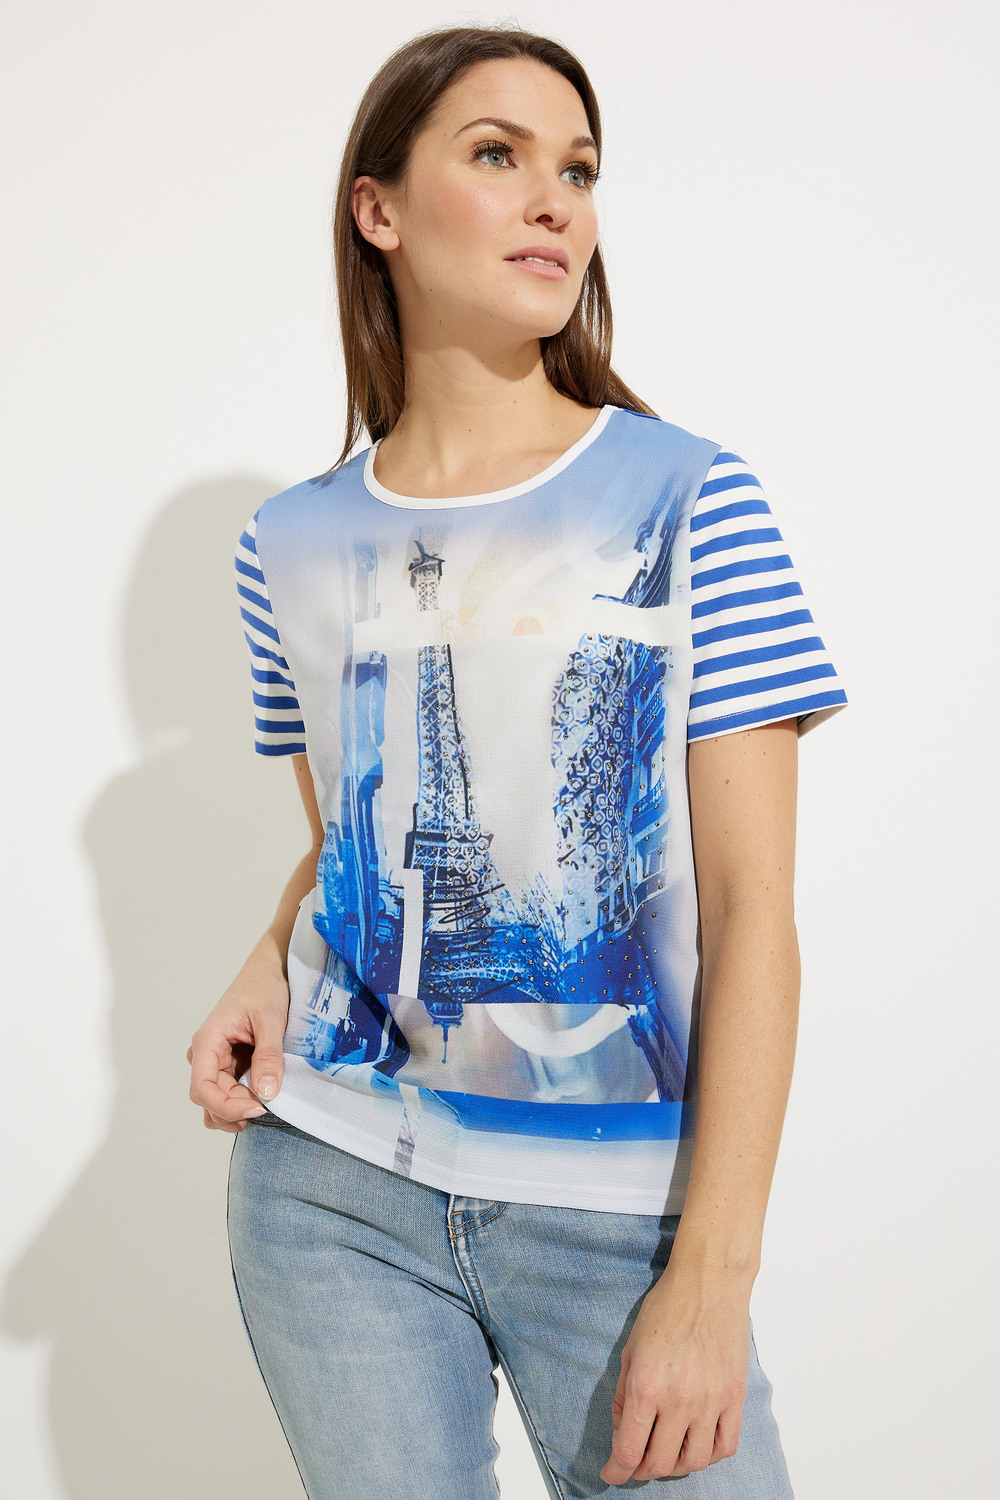 Graphic & Striped T-Shirt Style A41412. As Sample